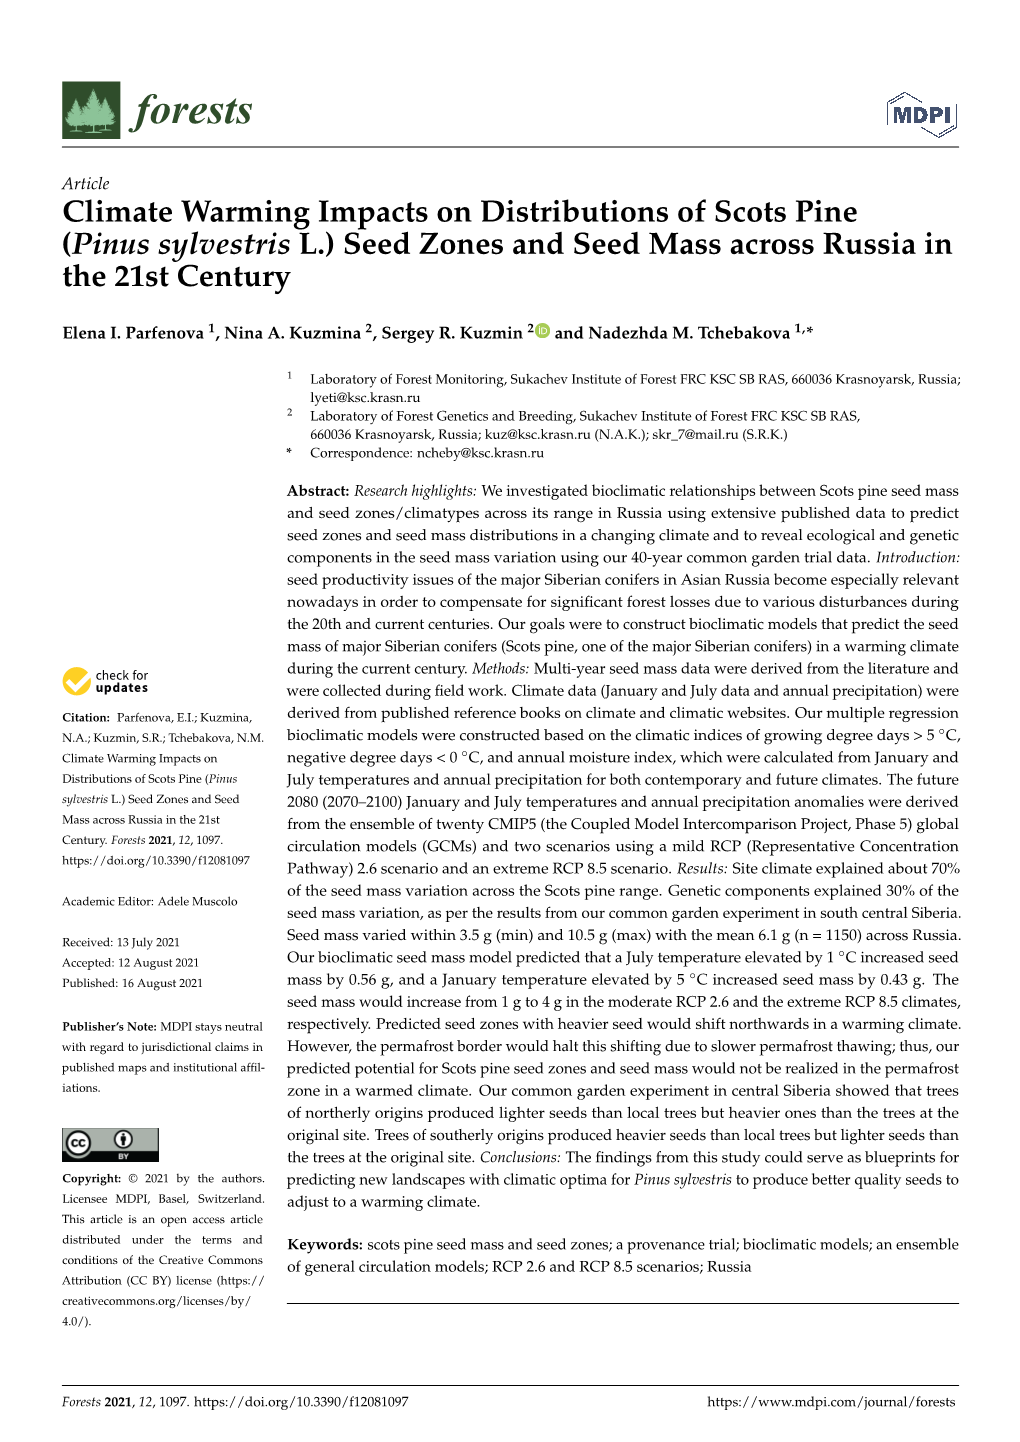 Climate Warming Impacts on Distributions of Scots Pine (Pinus Sylvestris L.) Seed Zones and Seed Mass Across Russia in the 21St Century